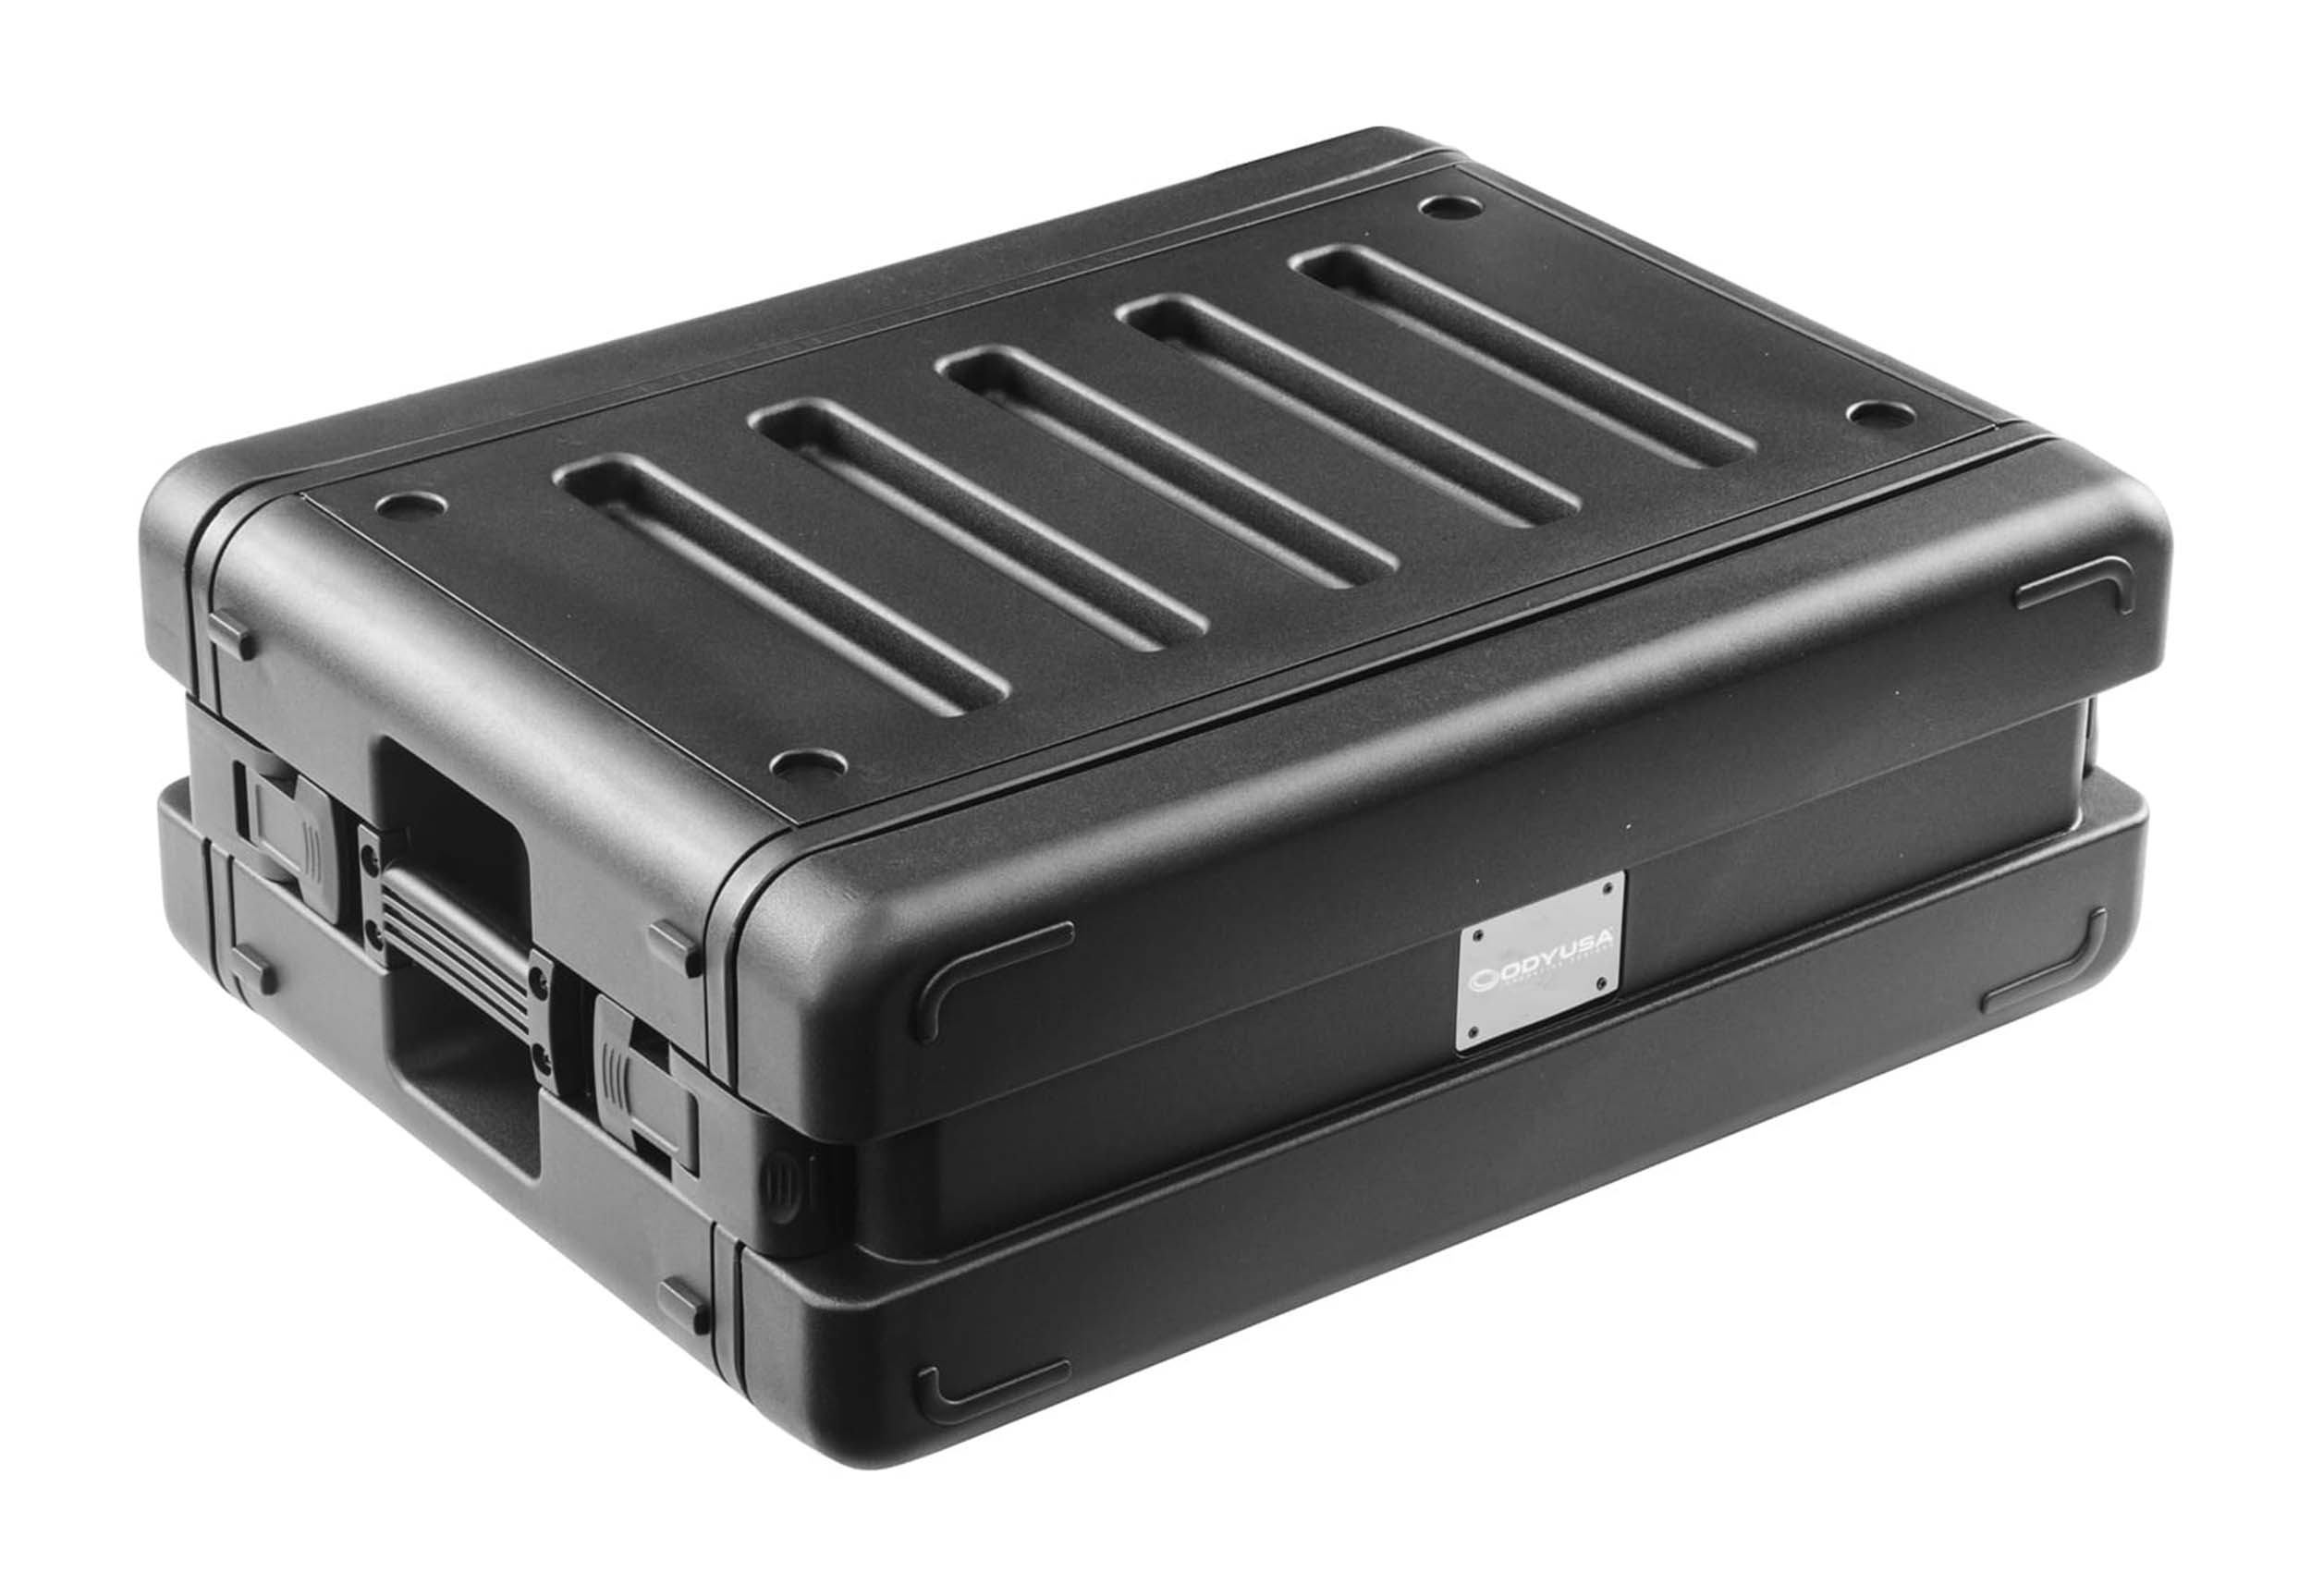 Odyssey VR3S, 10.5-Inch Rail-to-Rail Watertight Dust-proof Injection-Molded 3U Rack Case Odyssey